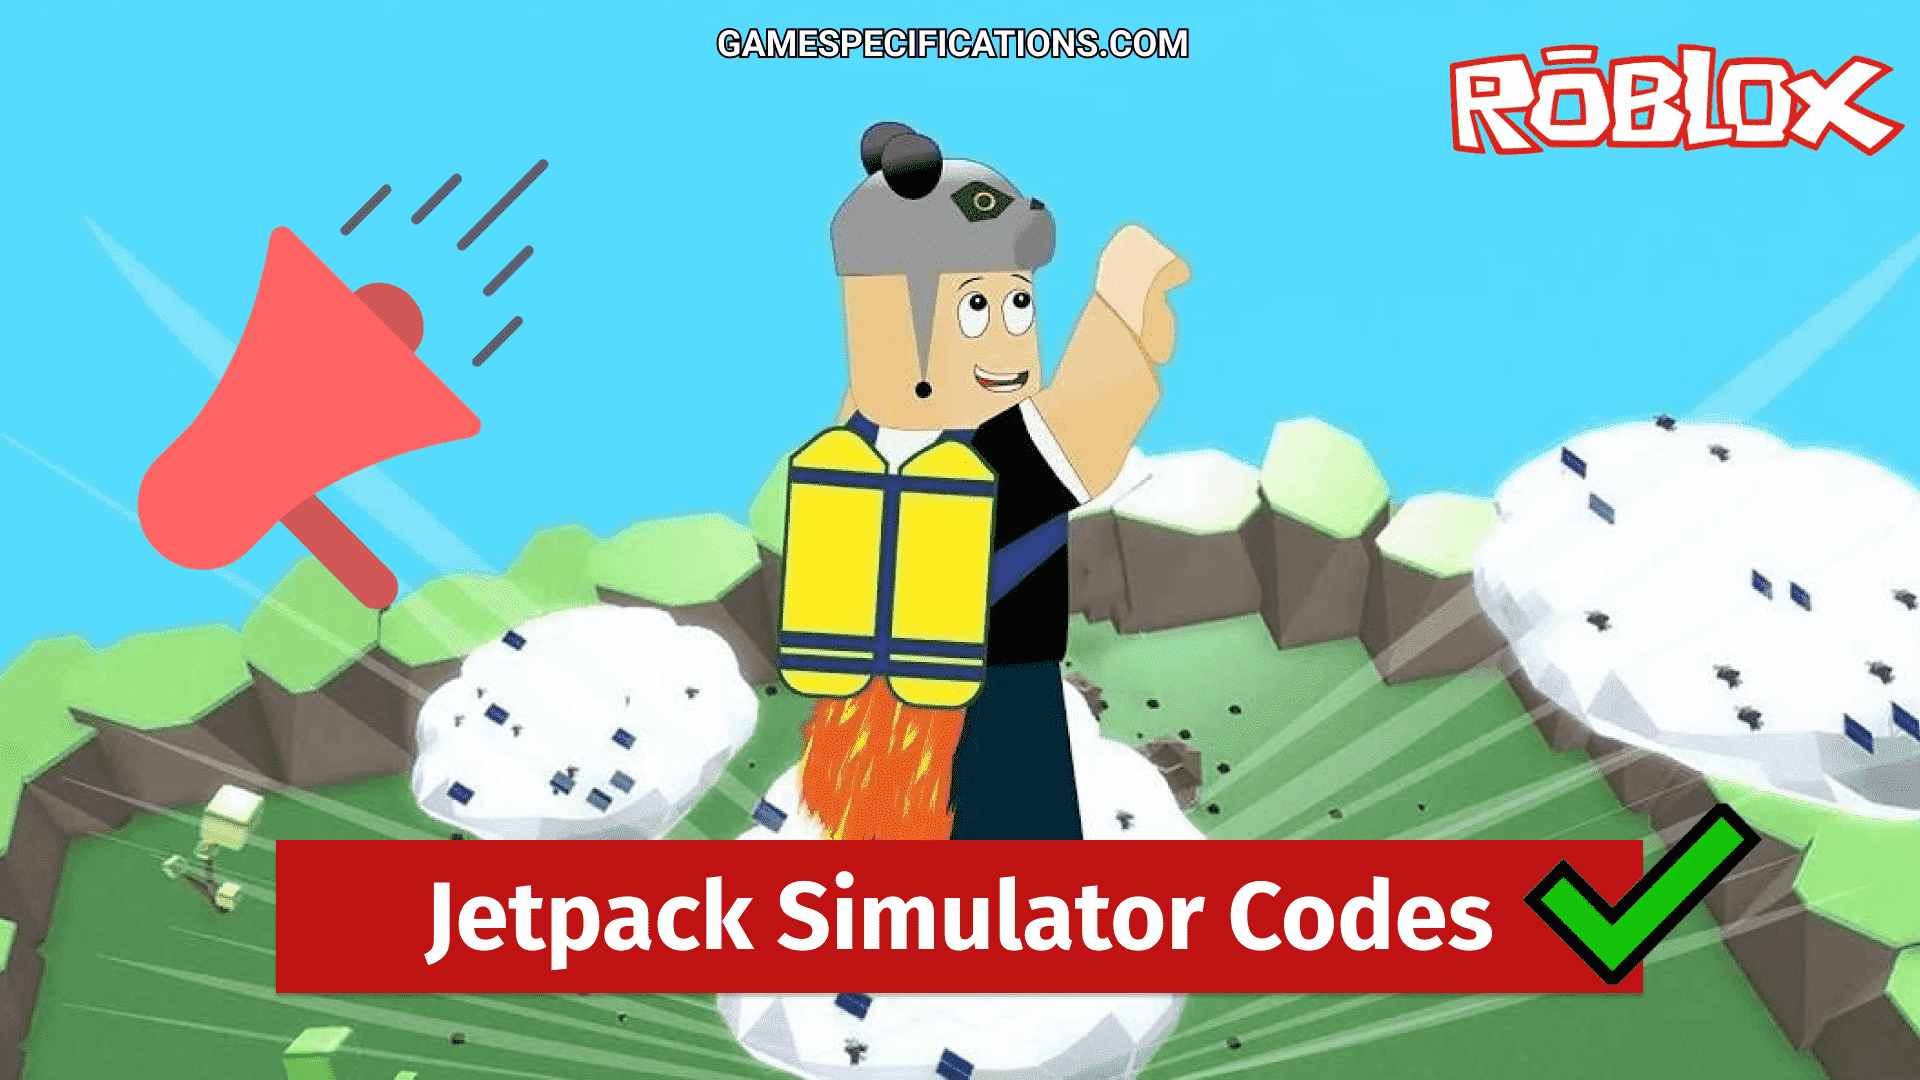 Roblox Jetpack Simulator Codes July 2021 Game Specifications - how to use a jetpack in roblox